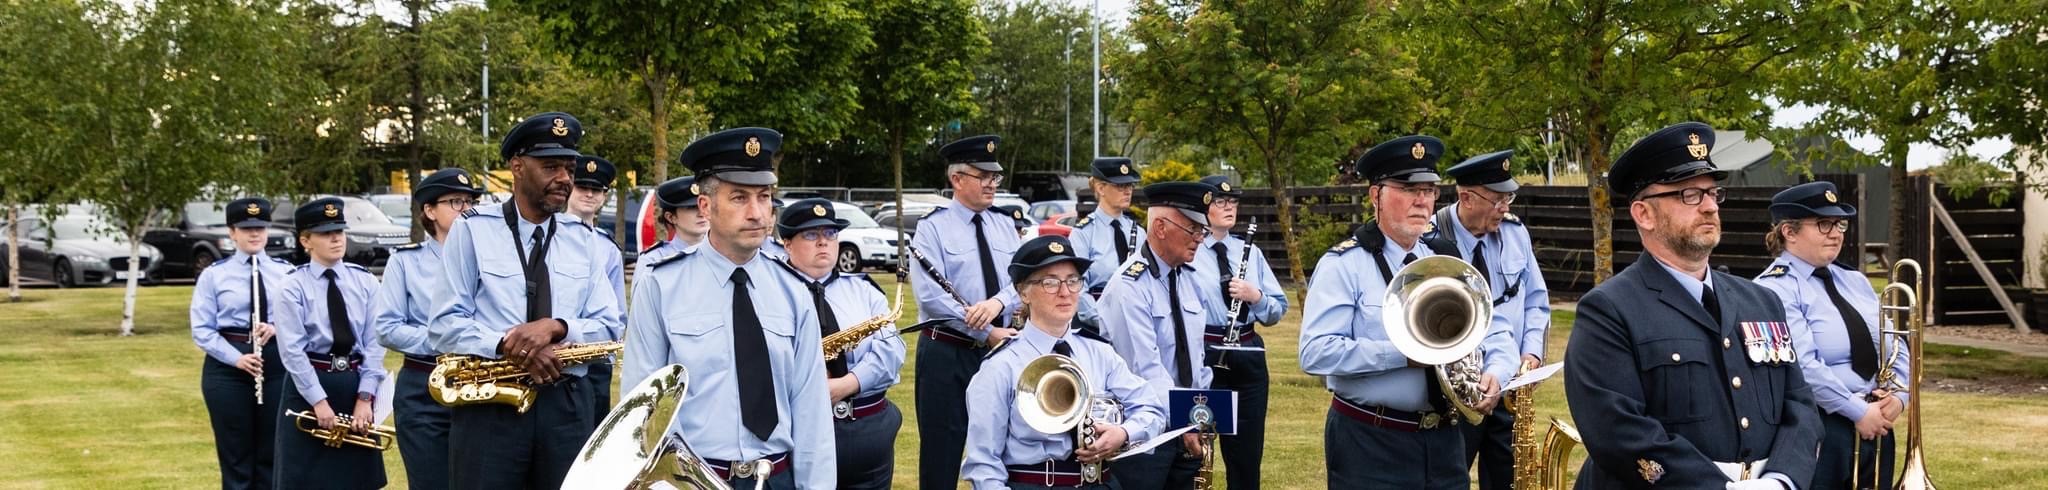 Image shows RAF brass band parading past car park.